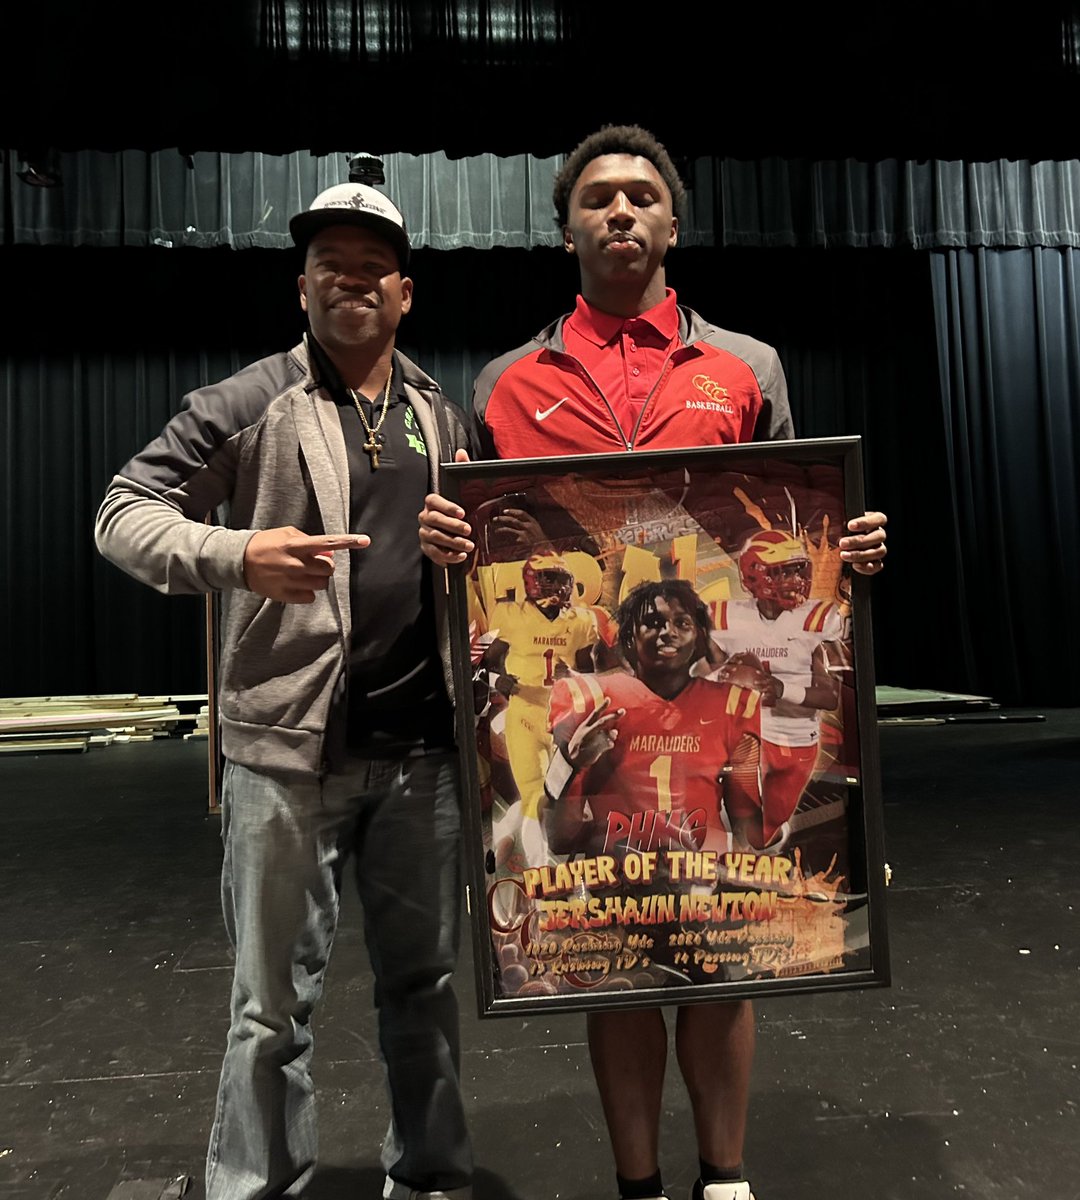 Player Of The Year Award 🏆 *Jershaun Newton CCC💯 -Lead his squad to an Undefeated Regular season - 2 consecutive state title runs - Passing Yards 2,084 14TDs -Rushing Yards 1,024 13 TDs - Sacks 4 - TFL 6